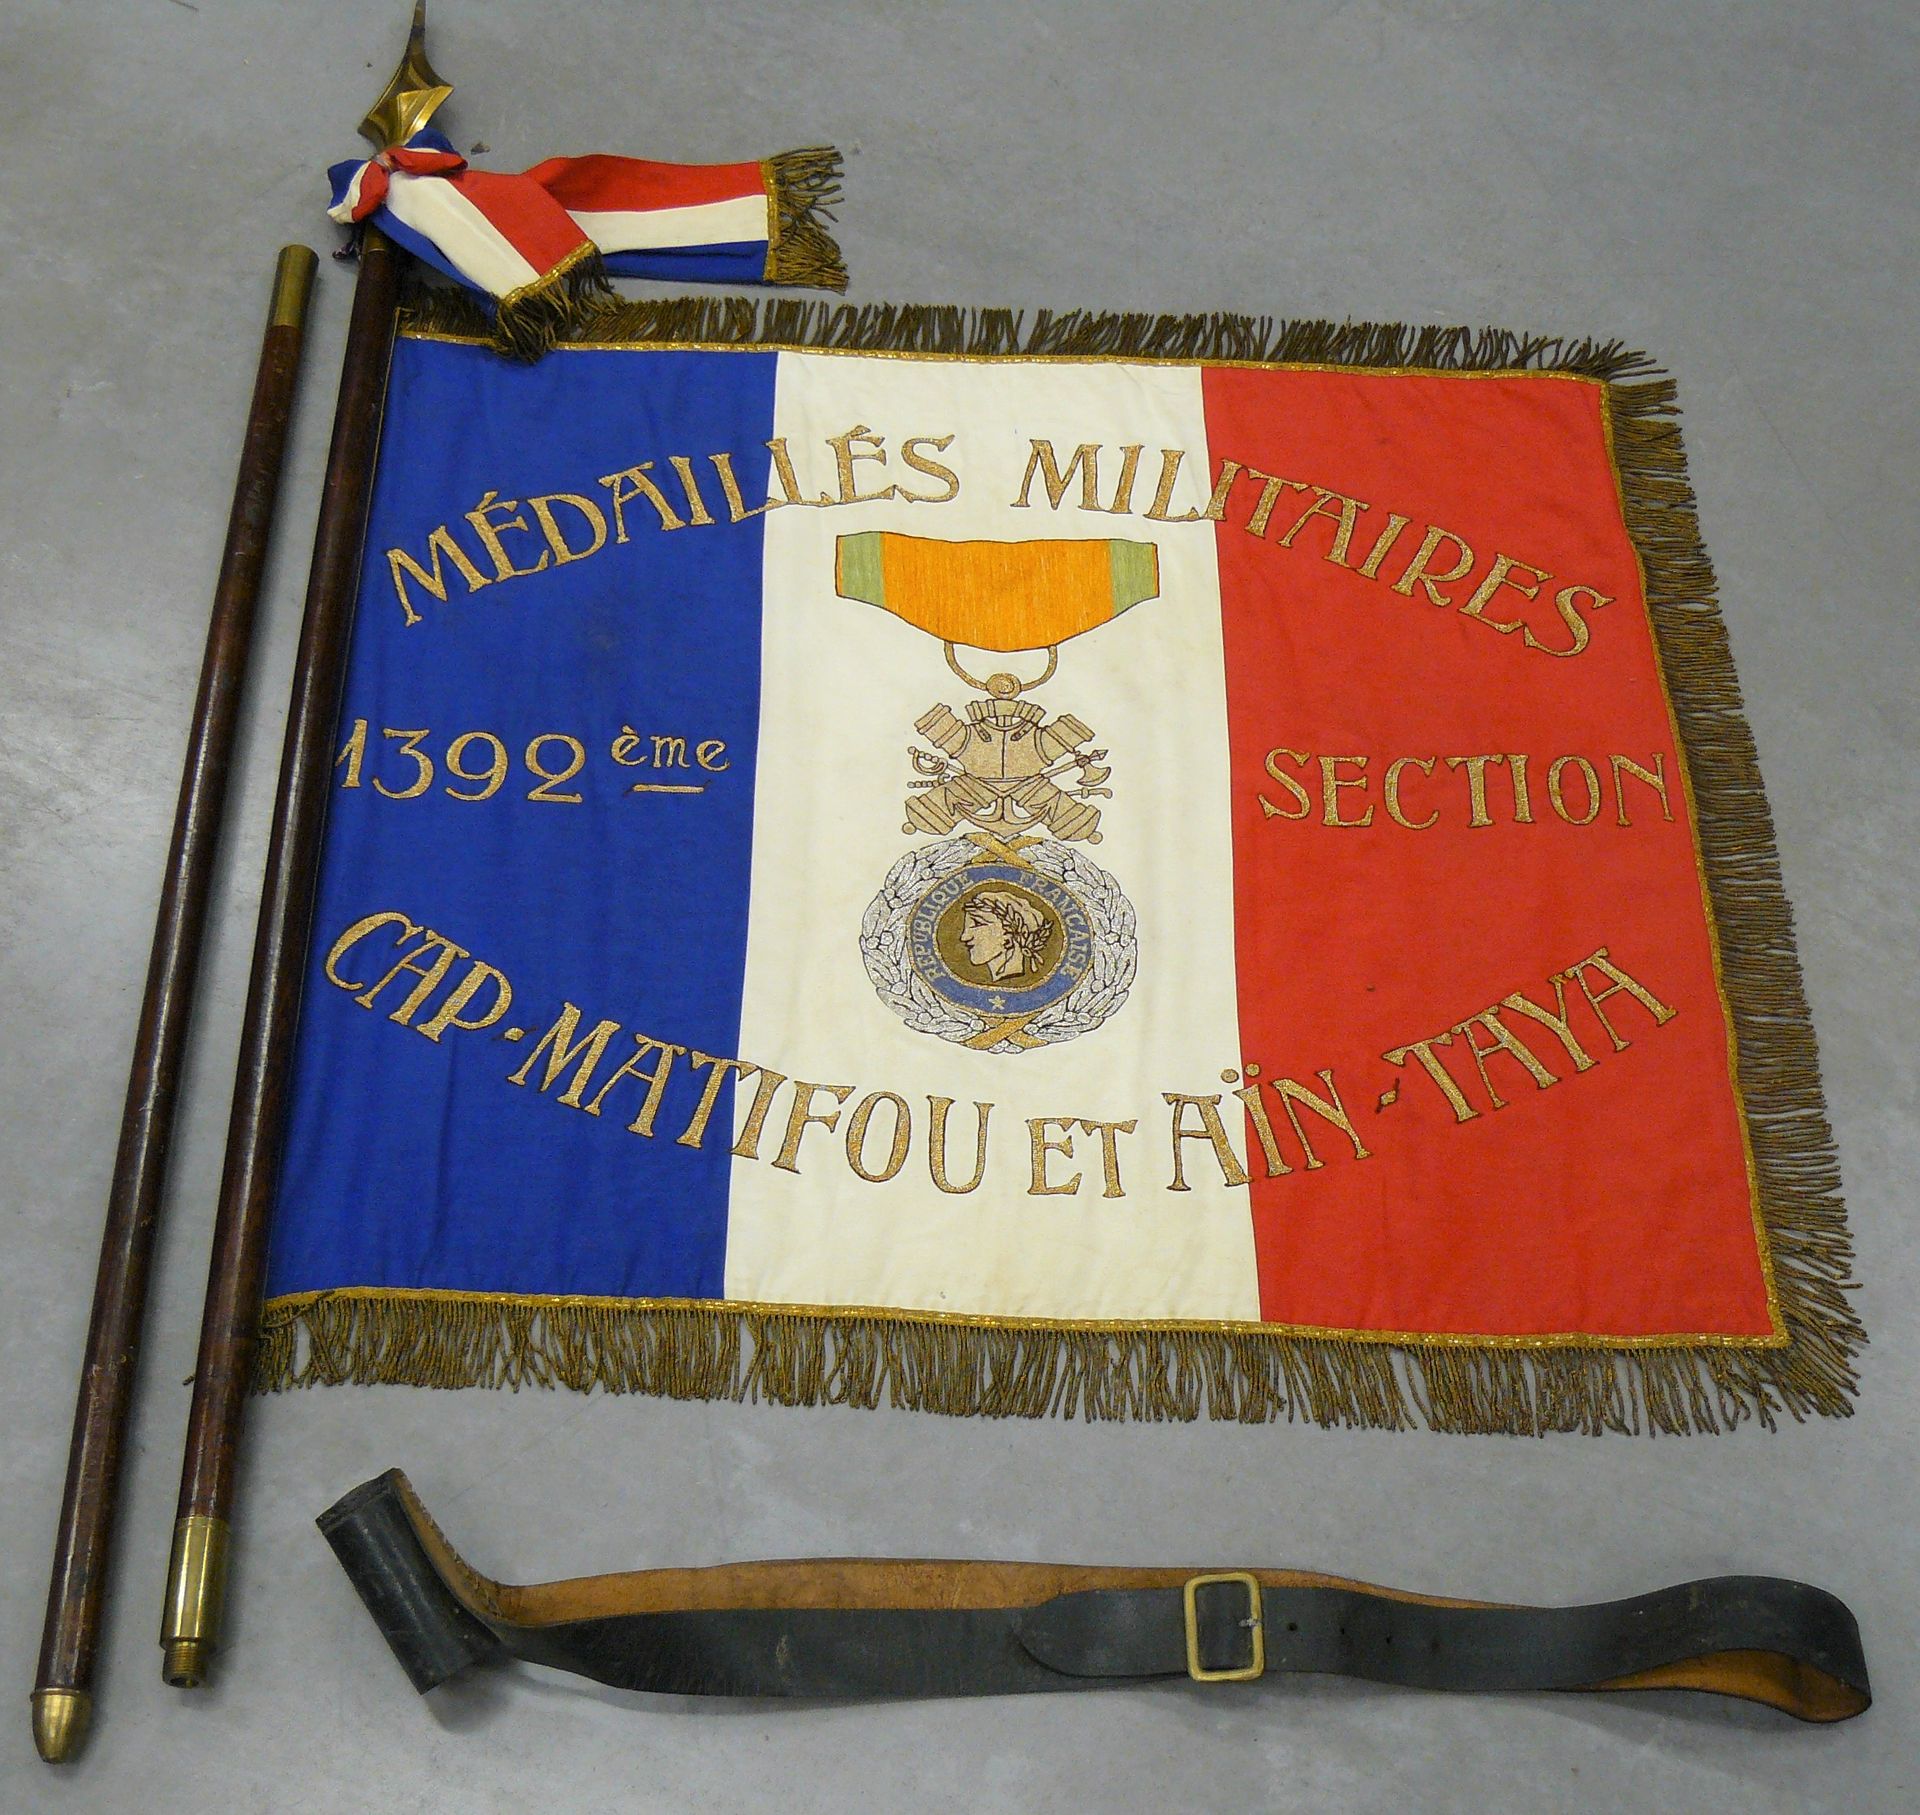 Null a tricolor flag designated: military medals 1392nd section, Cap. Matifou an&hellip;